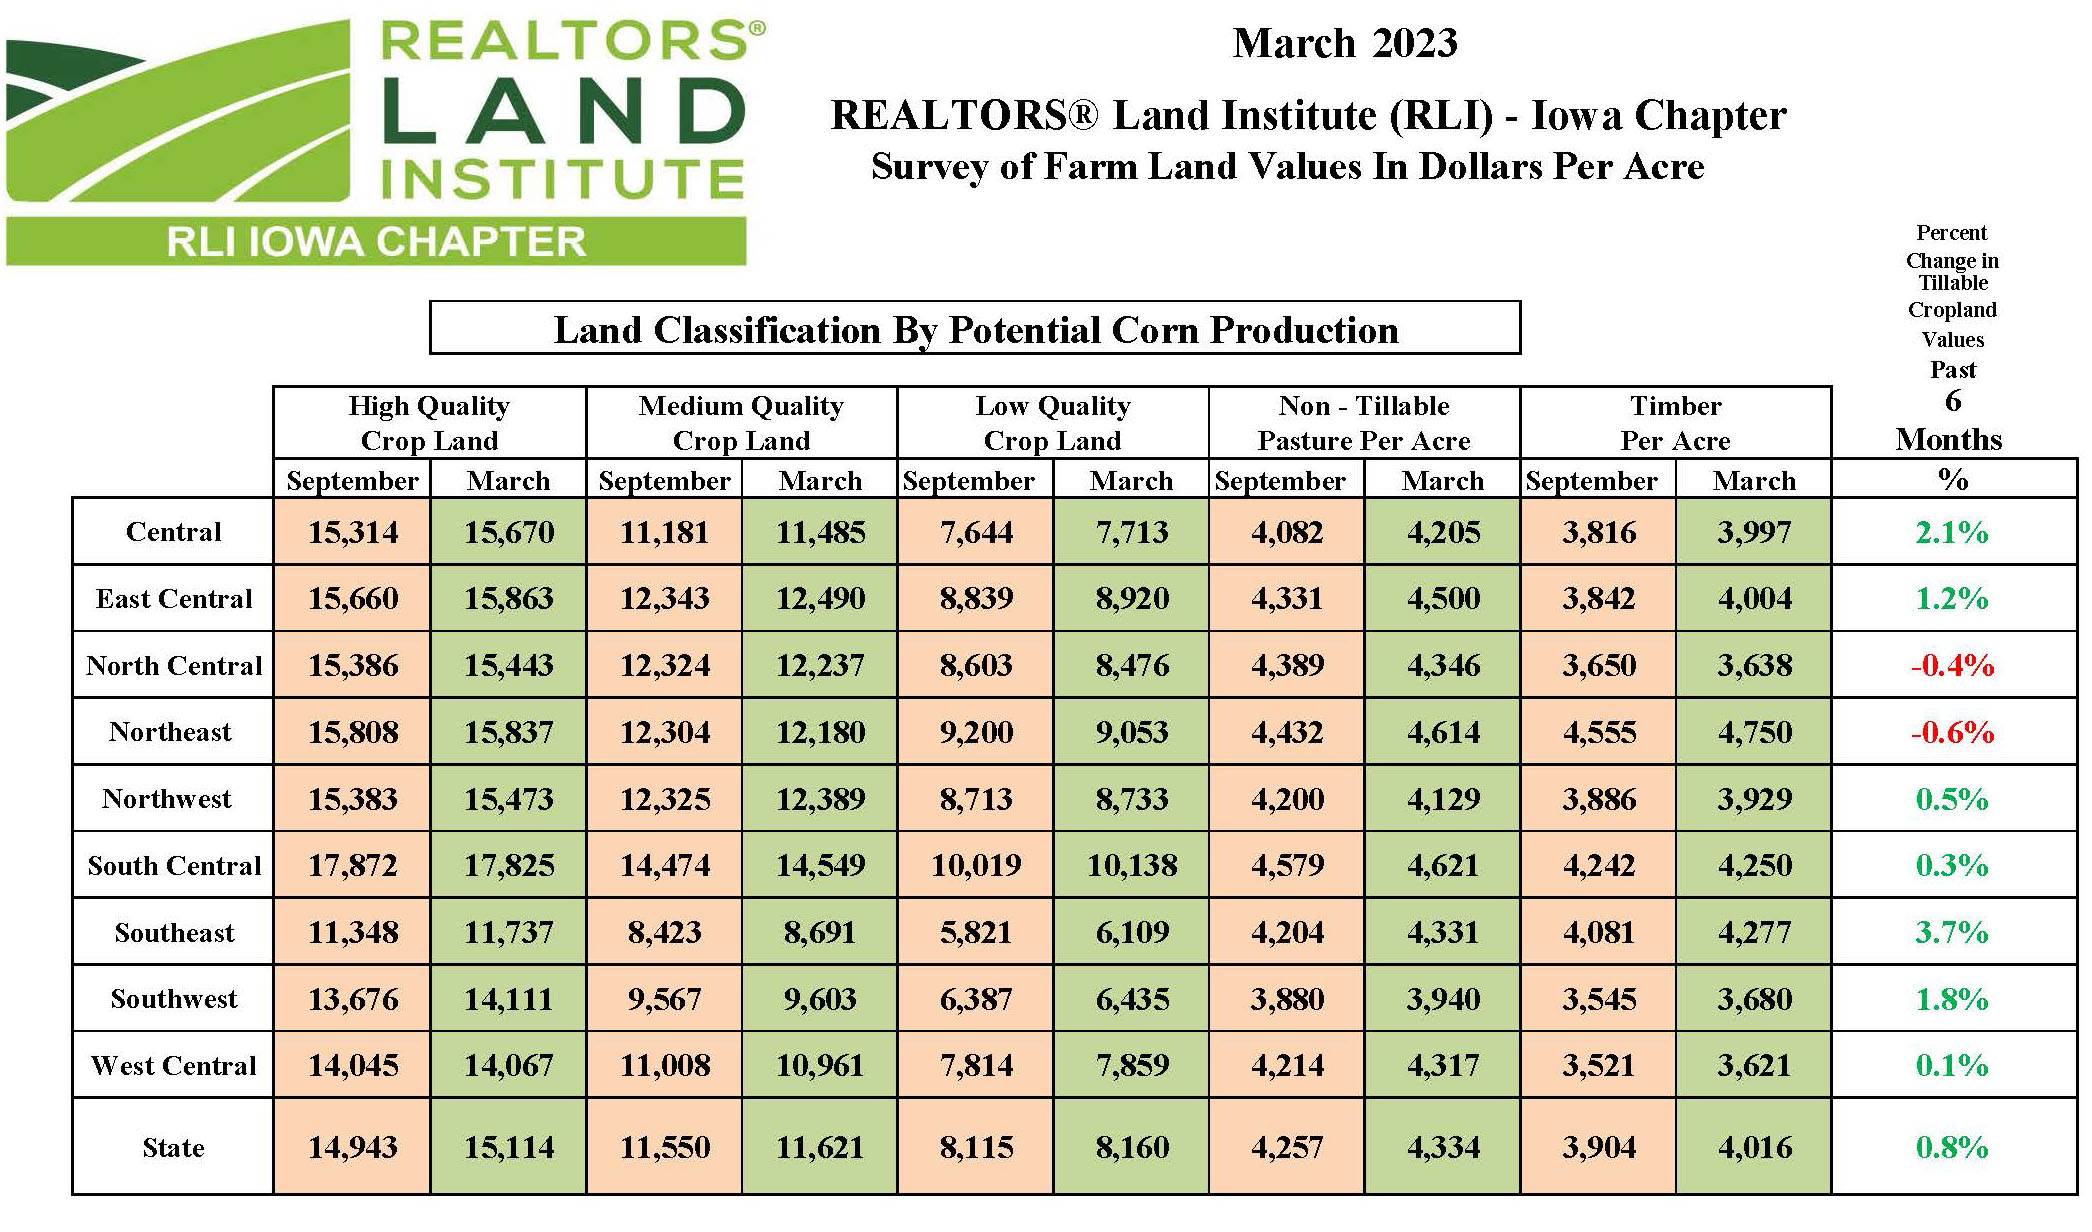 table shows changes in average farmland values